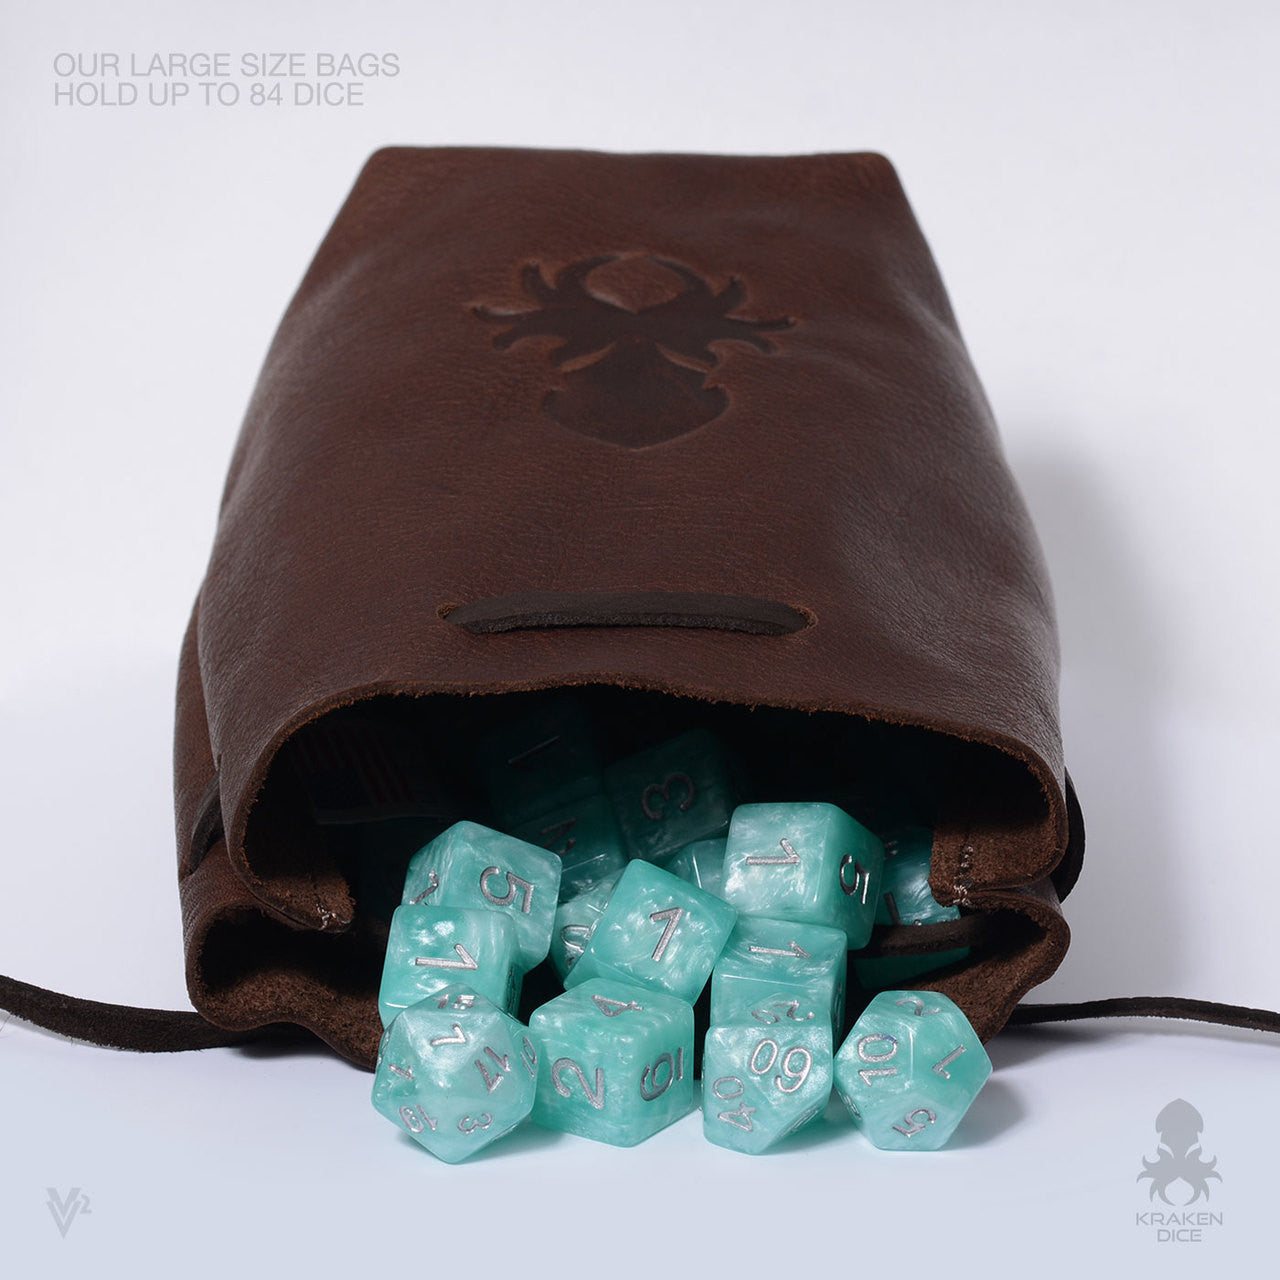 Freestanding Large Dice Bag In Old World Leather